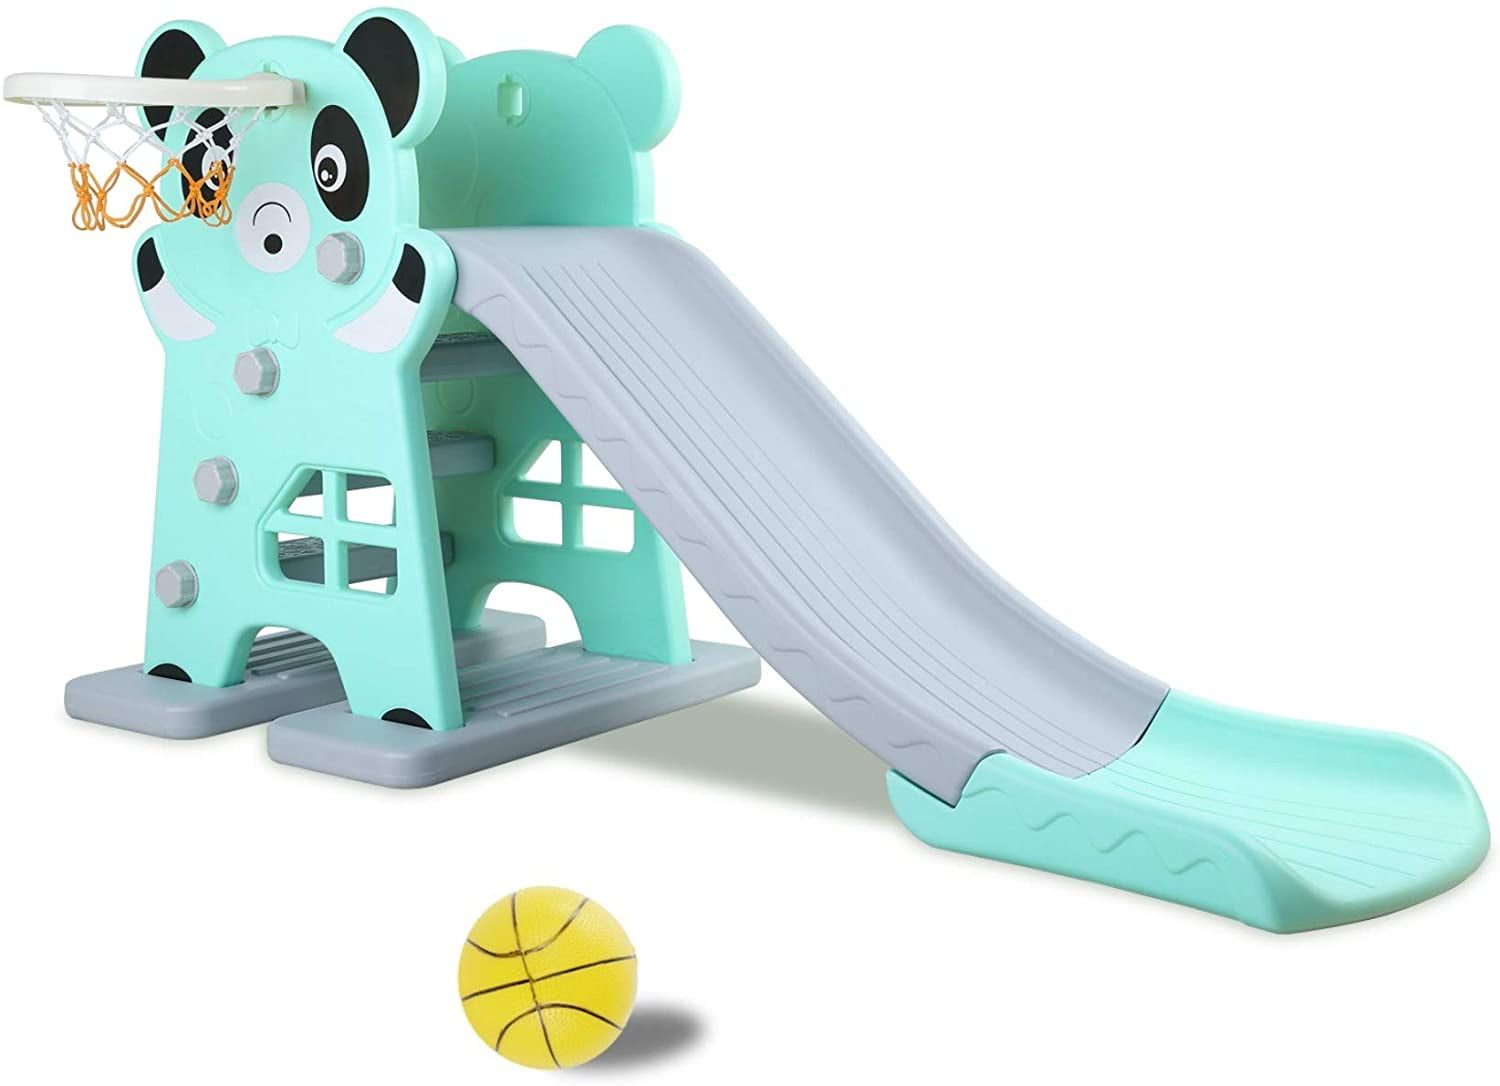 Exercise Play Childrens Slide Multi-Function Combination Folding Toys Baby Climber Slide for Playground Home for 3-9 Years Old Blue NDGDGA Kids Slide Toy Toddler Slide with Basketball Hoop 